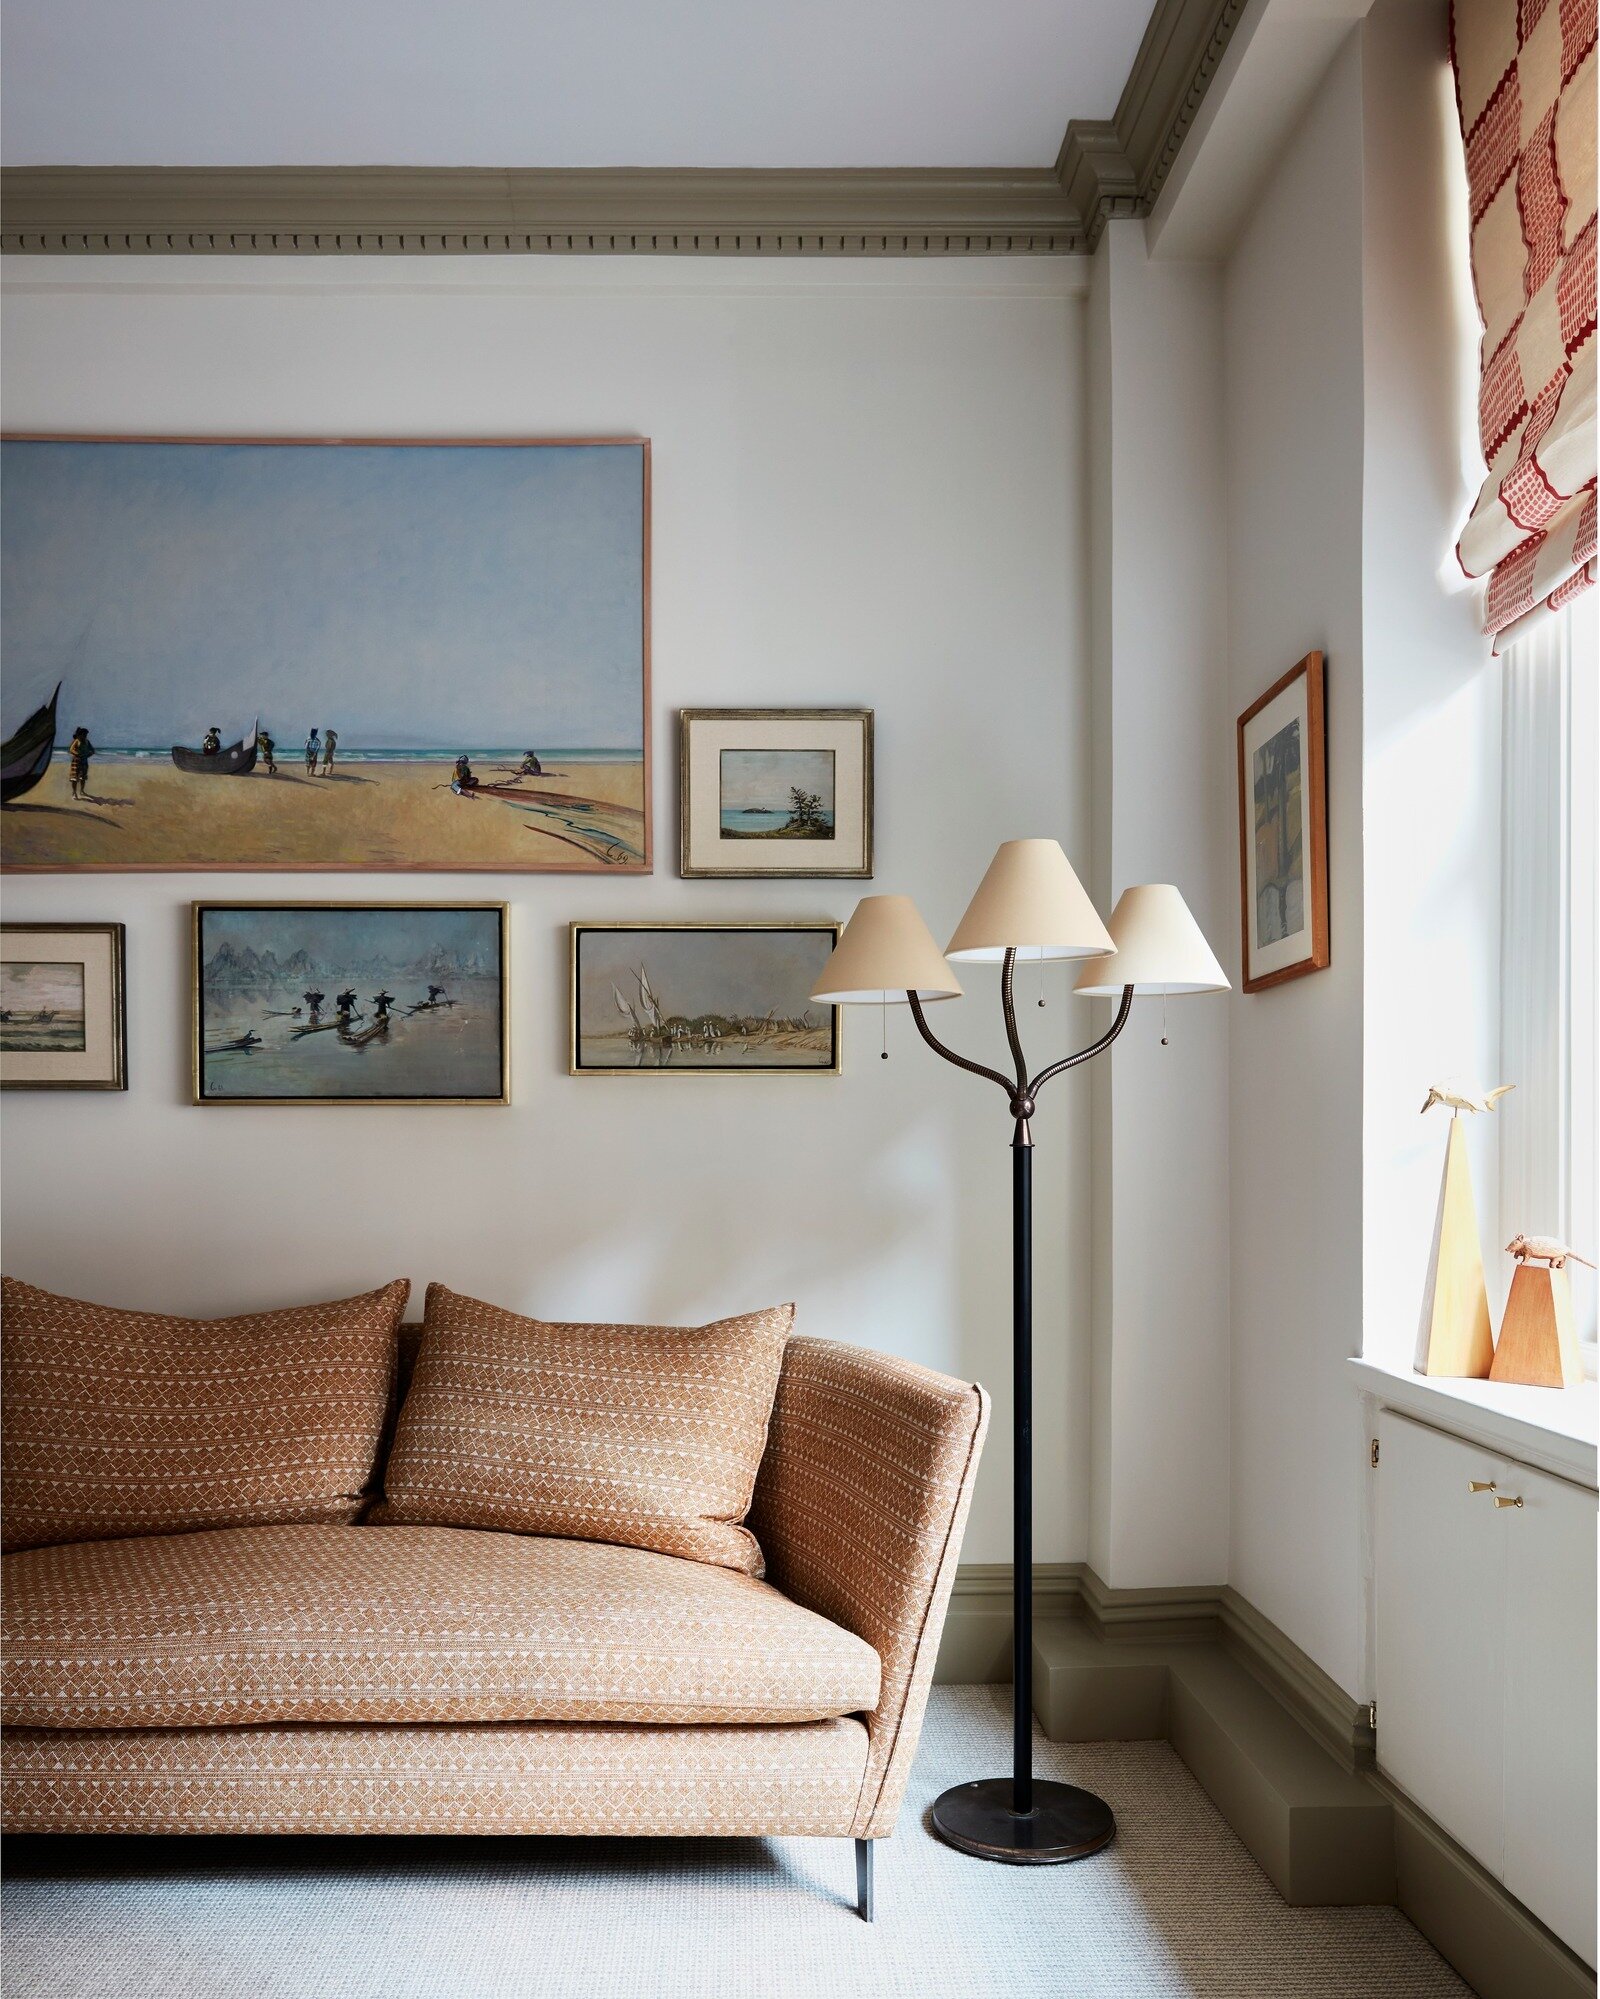 Happy Friday! I don't know about you, but I would gladly grab a book and throw myself onto this sofa for the weekend. 
 
Clean lines, gorgeous textiles, soothing colors, and beautiful art are always a winning combination. Add a vintage lamp for somet